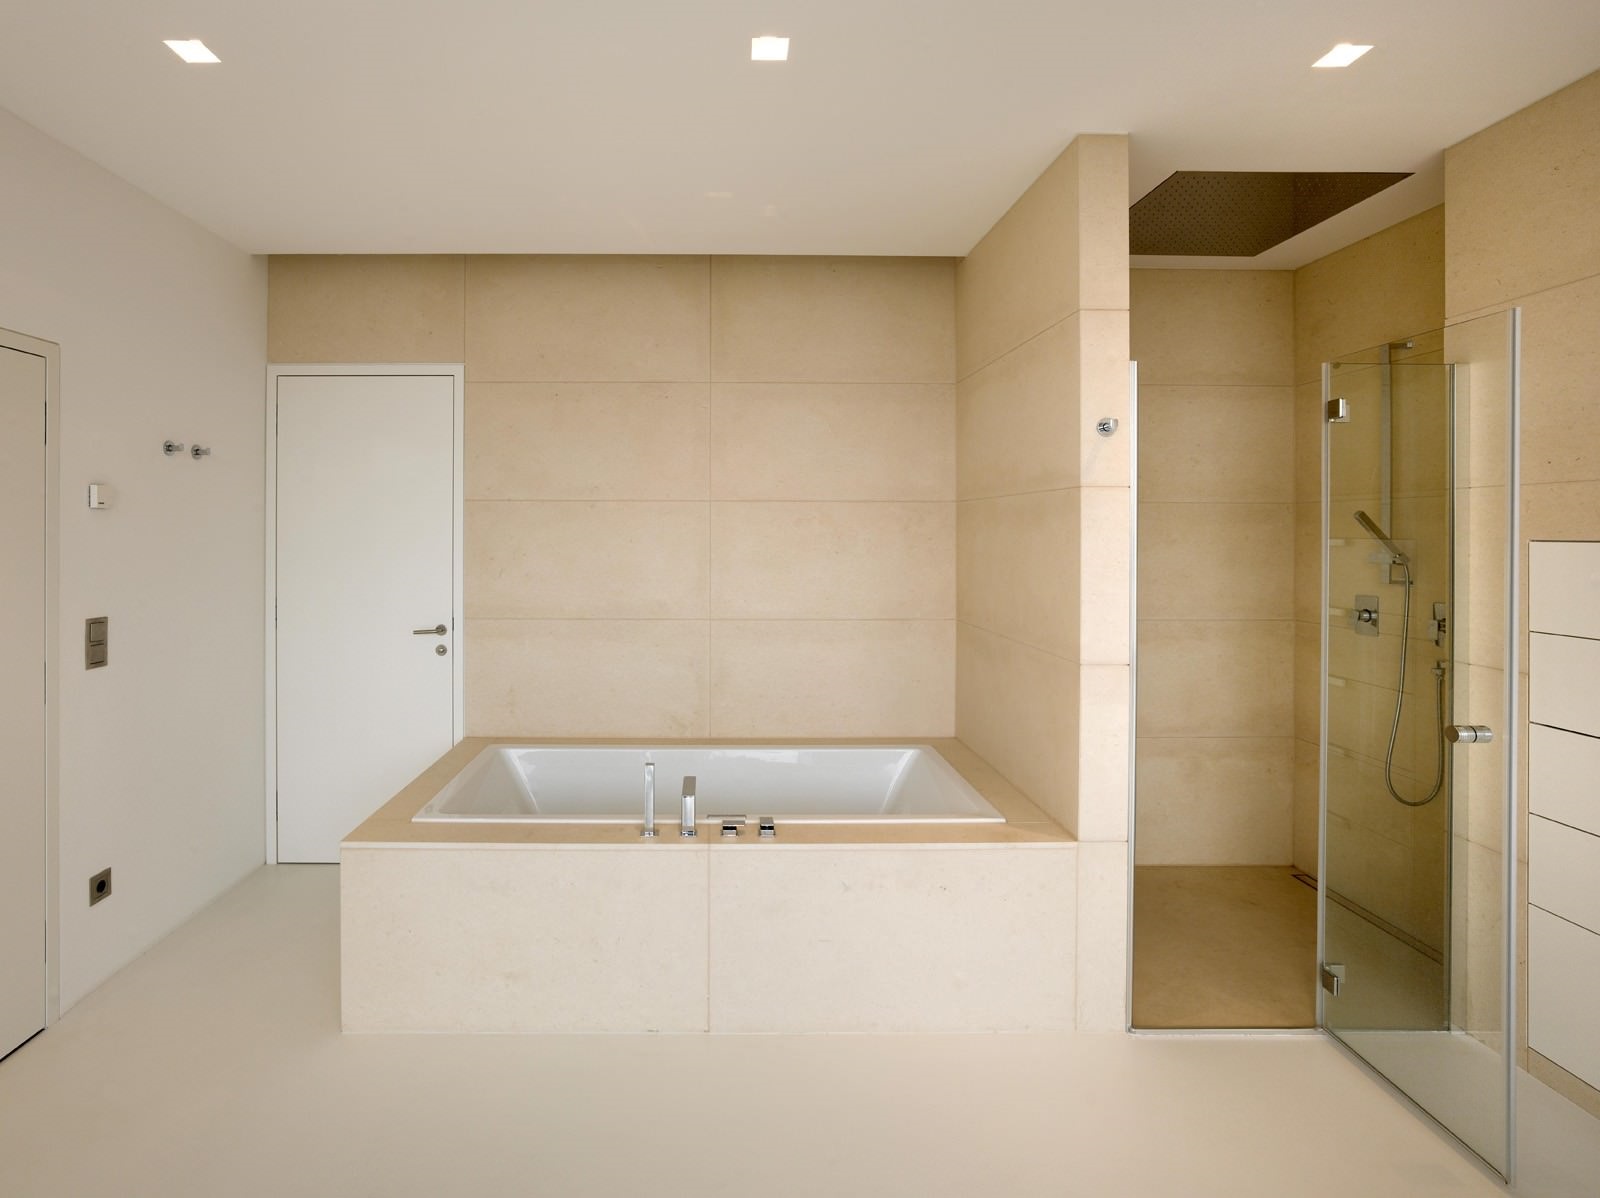 An example of a beautiful bathroom design in beige color